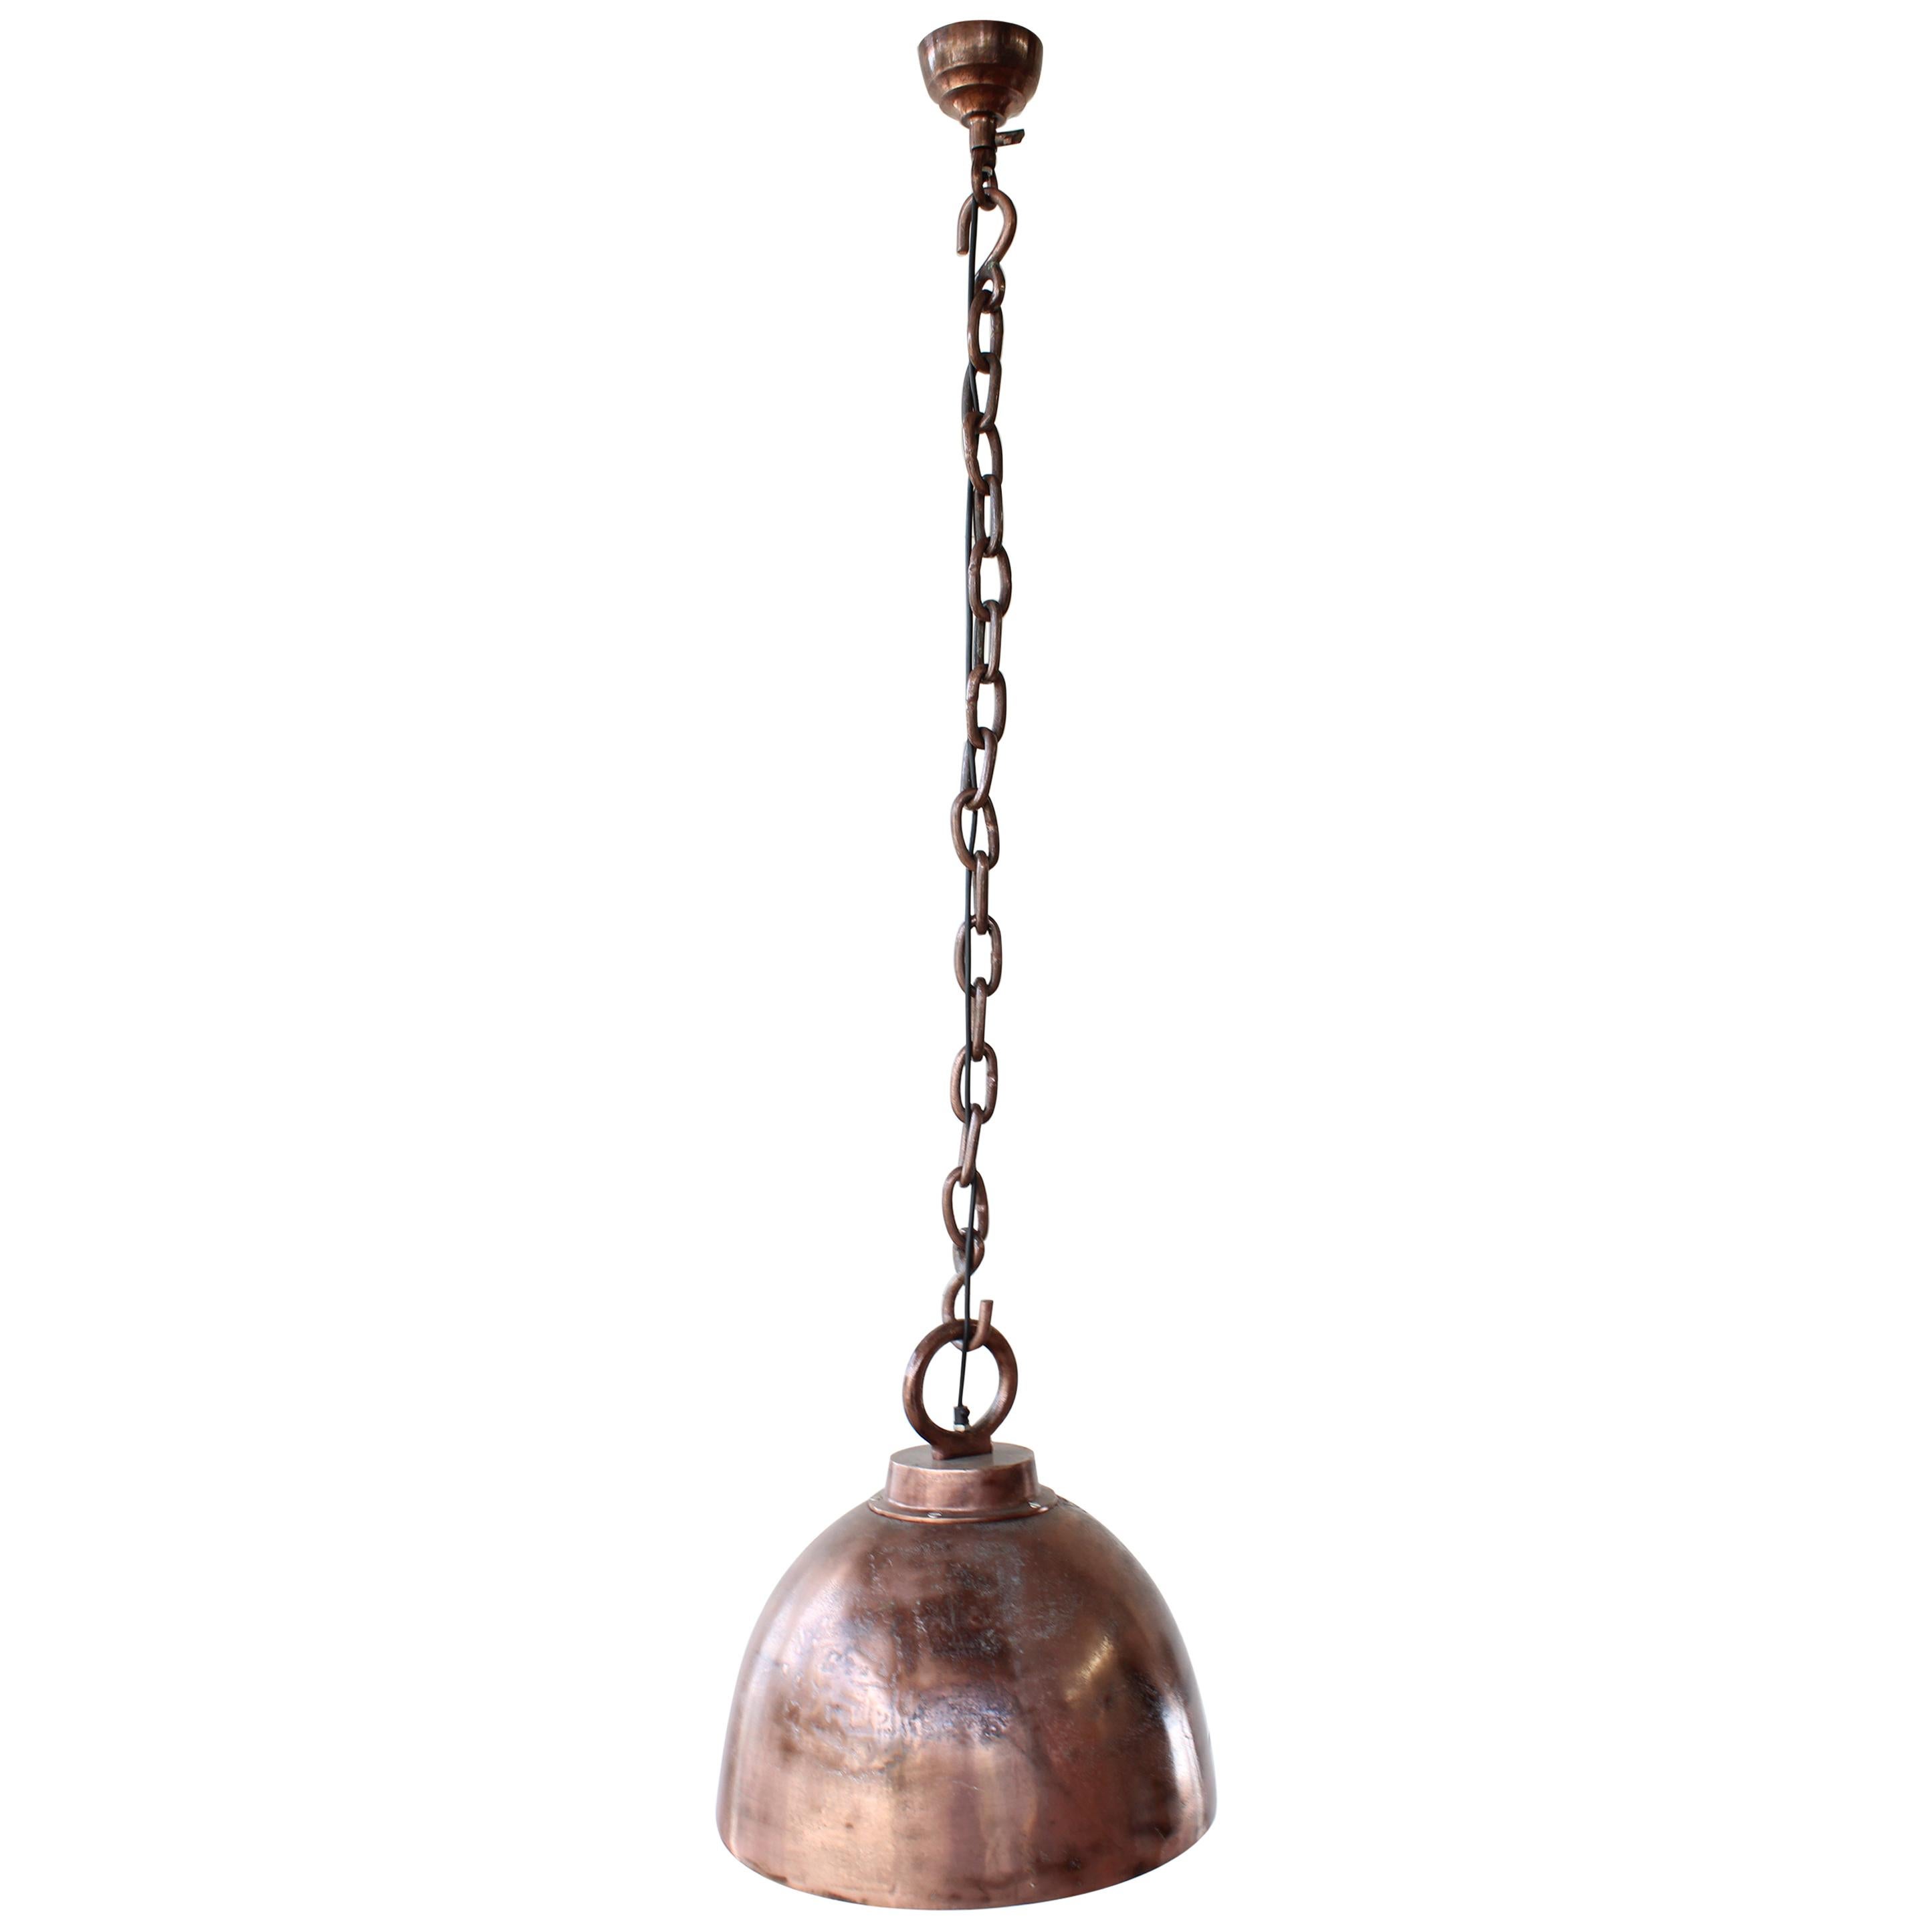 Hanging French Pendant Light in Copper